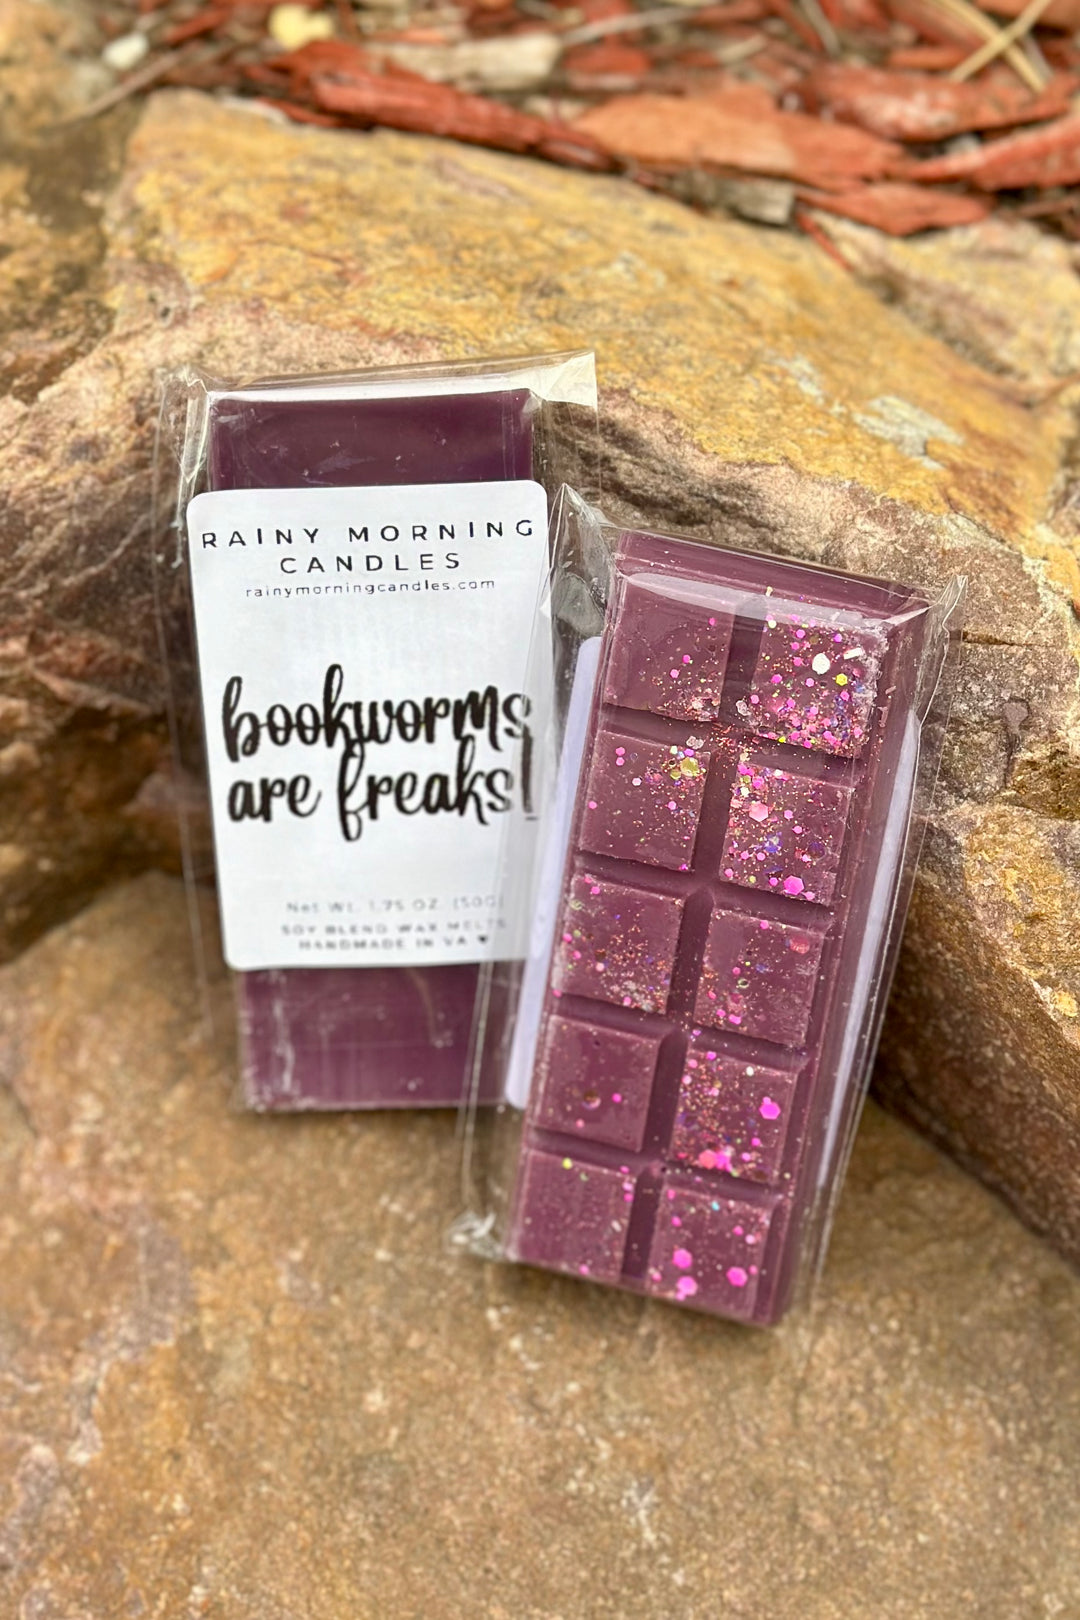 Bookworms are Freaks Wax Melts